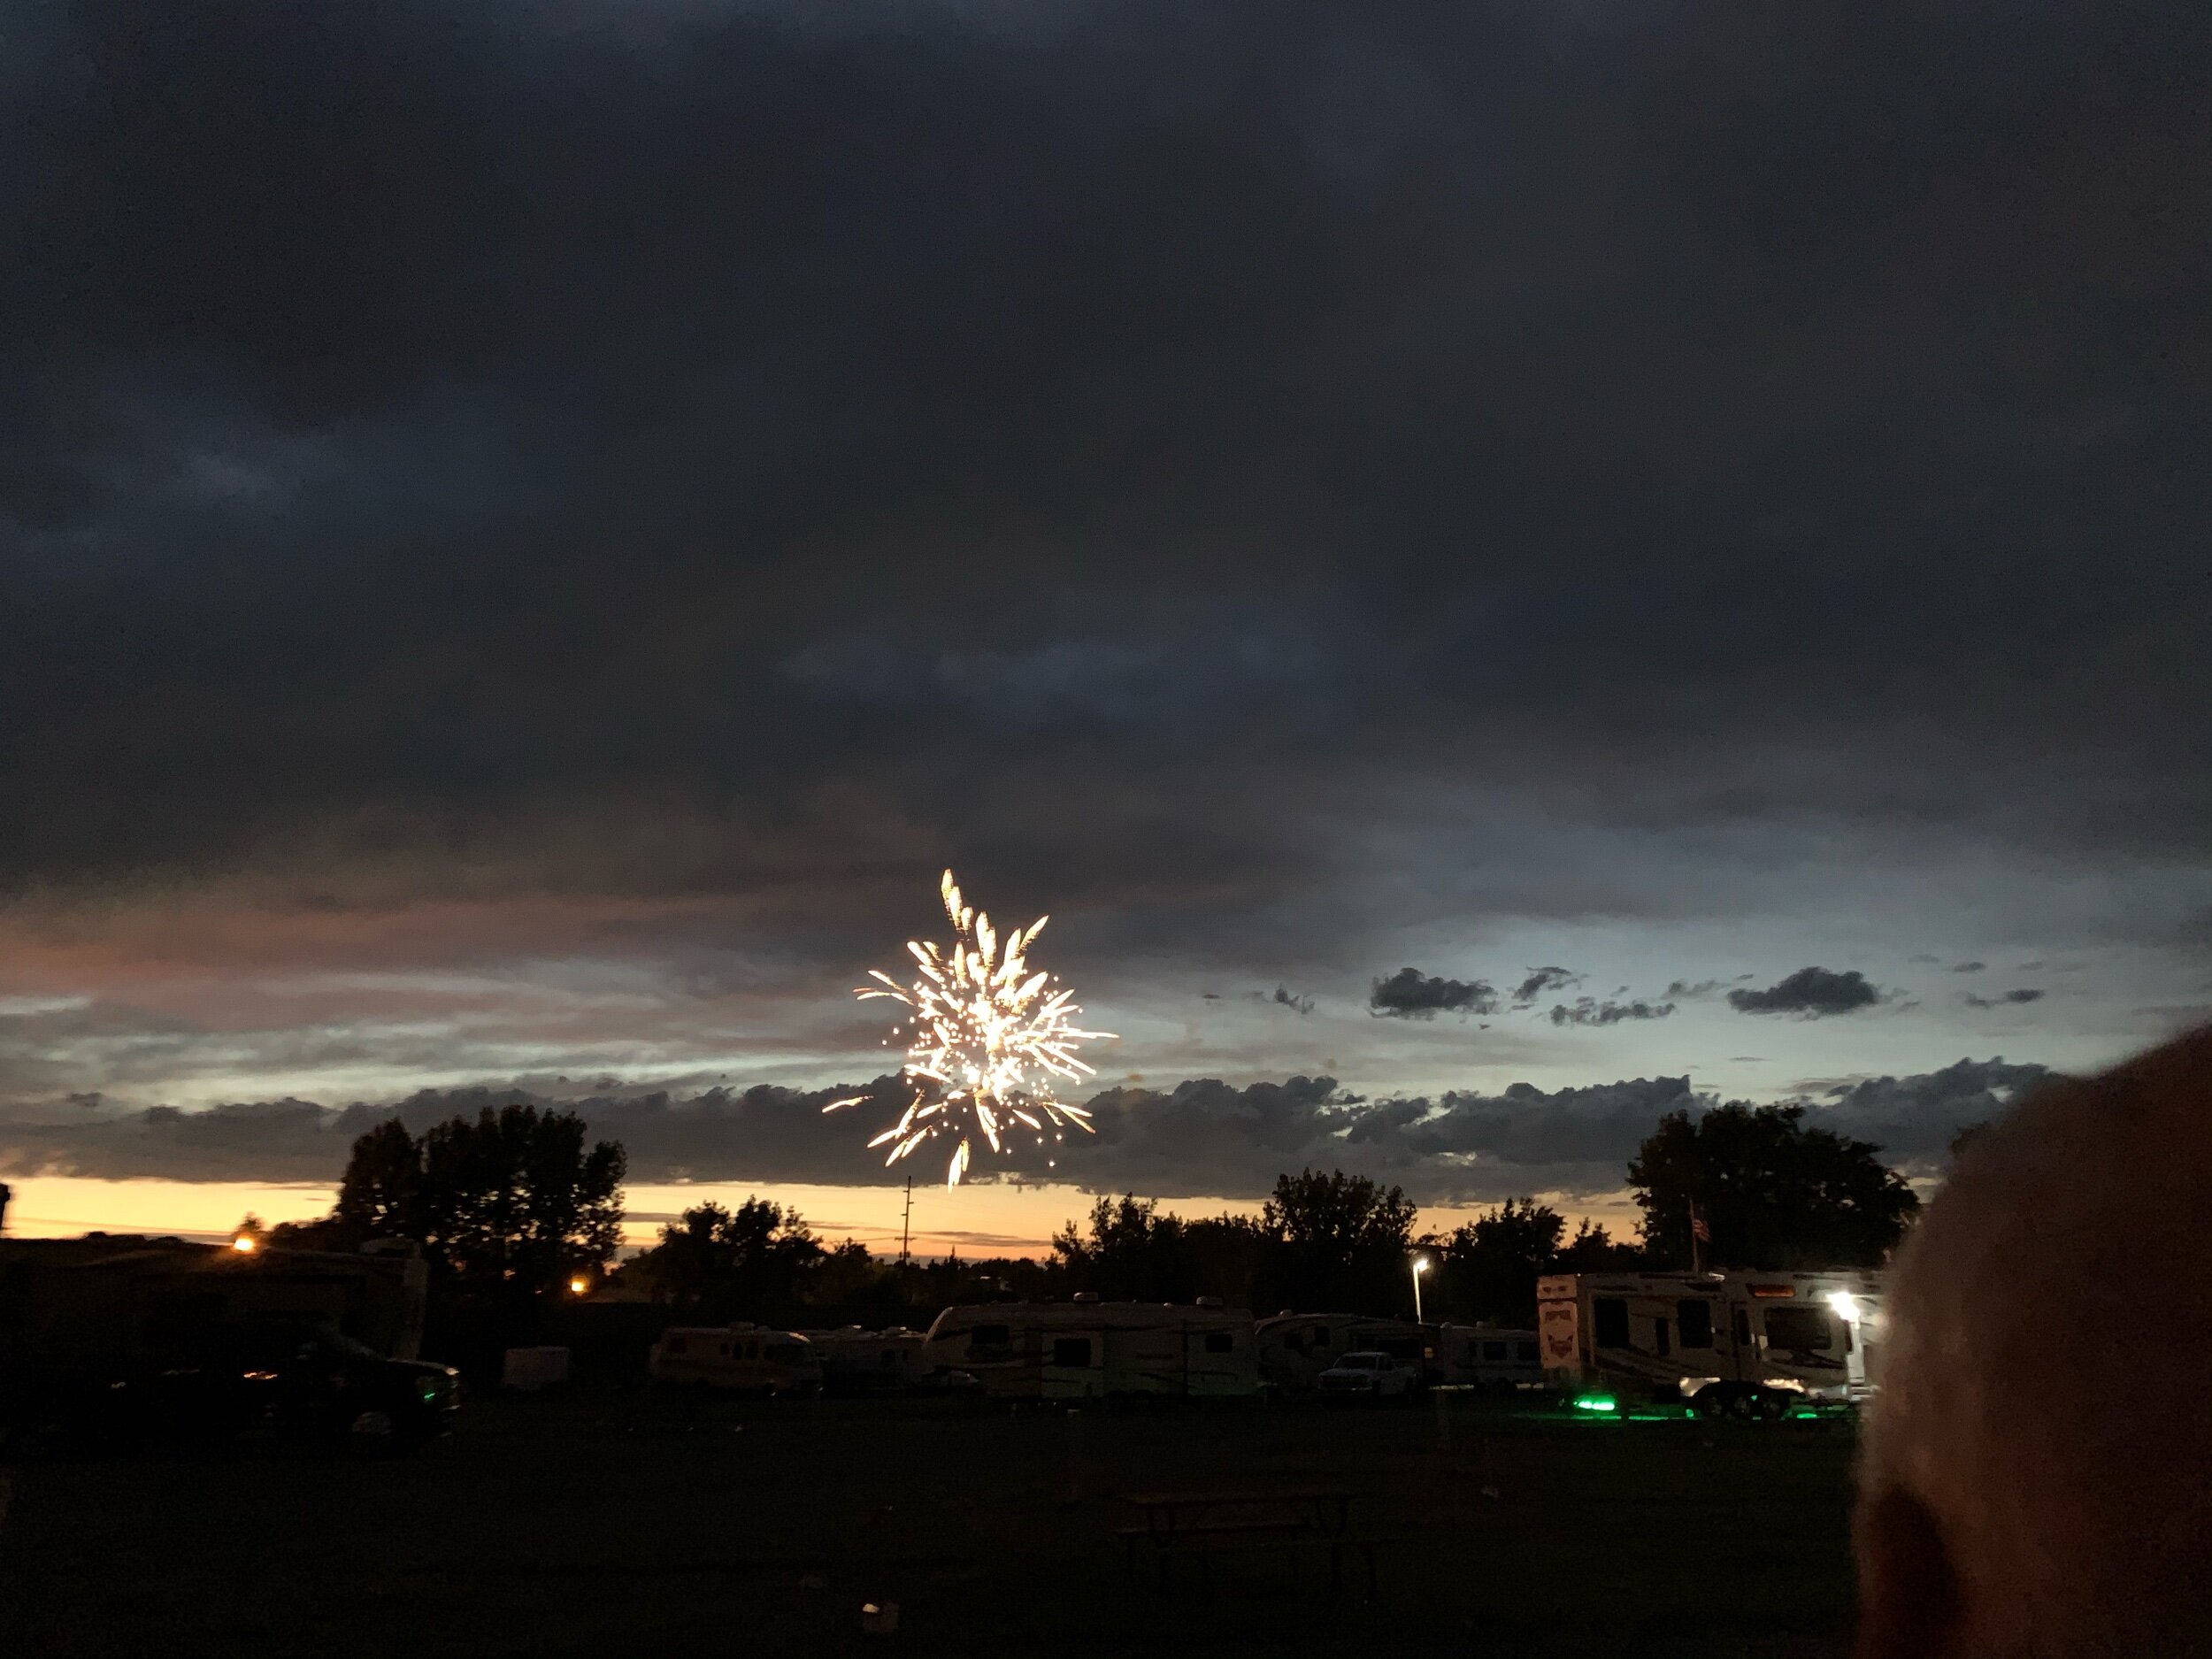  It was unusual for us to sit in jackets and blankets on July 4th to watch fireworks. It also does not get completely dark out here until around 10:20 pm, so the fireworks were done while it was still partially daylight. This picture was taken at 10 